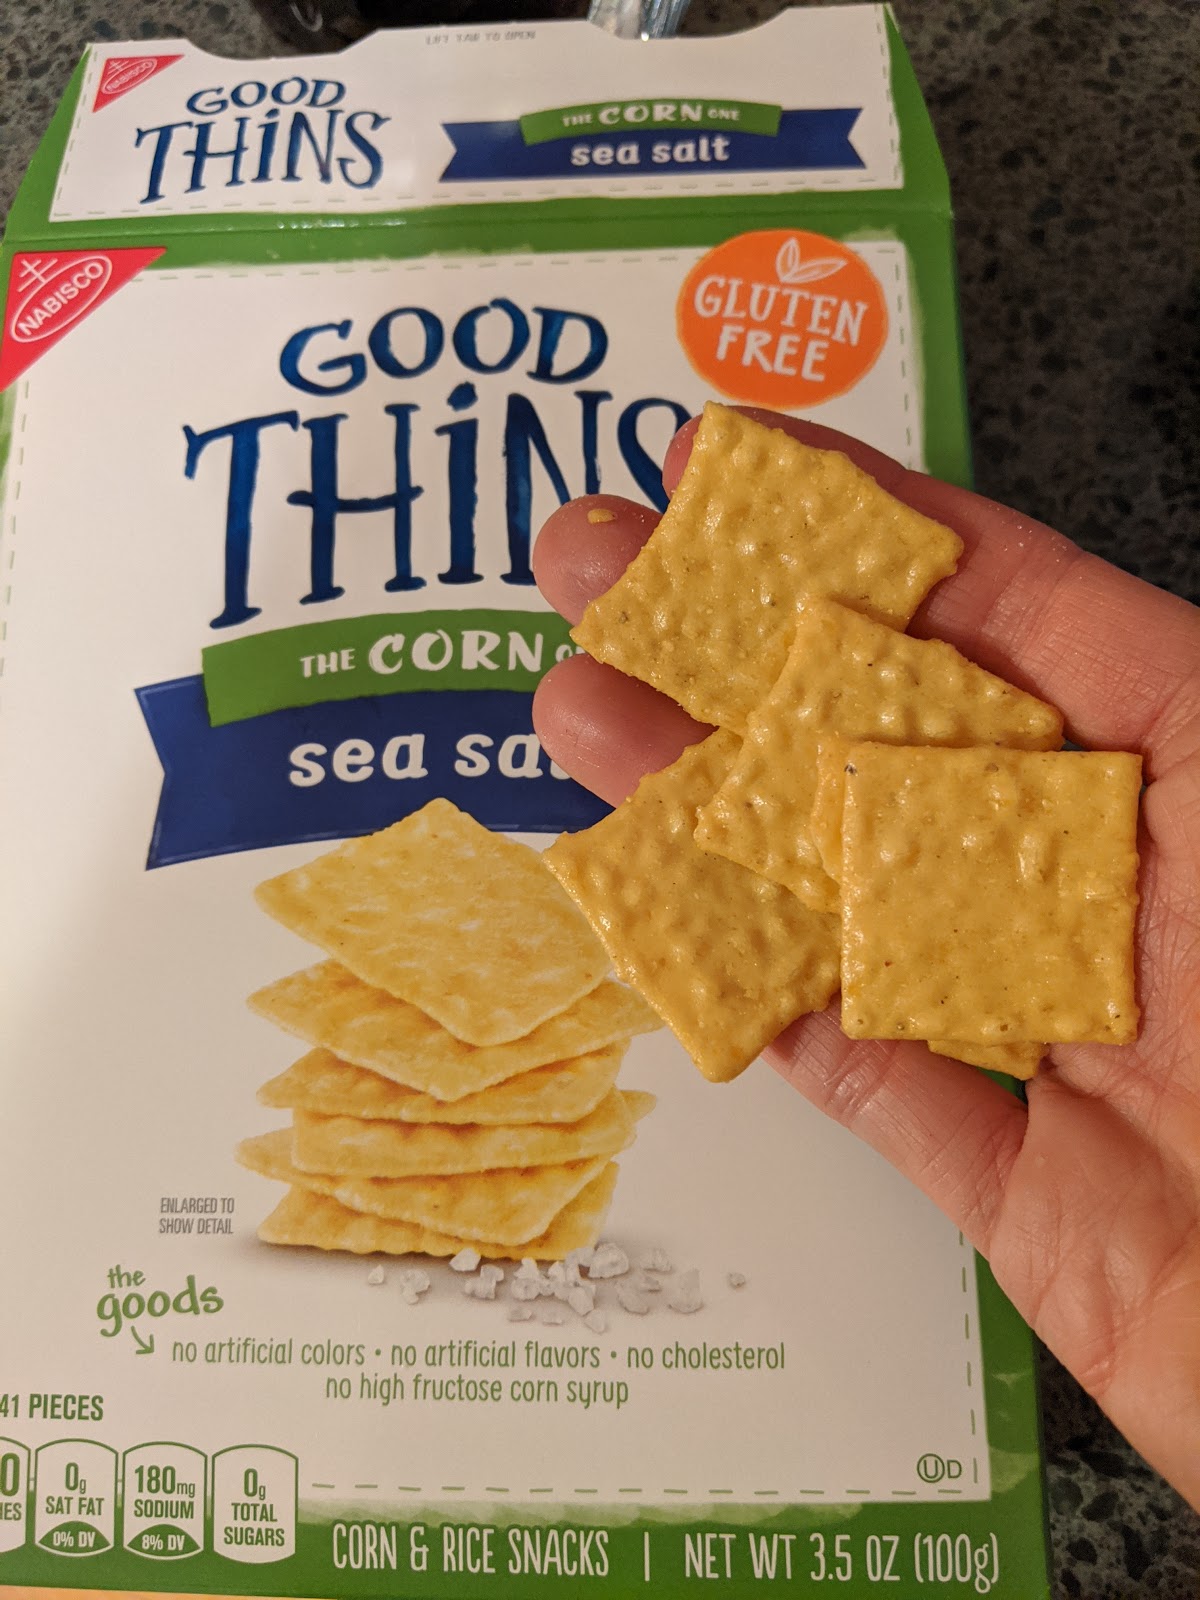 Introducing: GOOD THiNS #GOODTHiNS